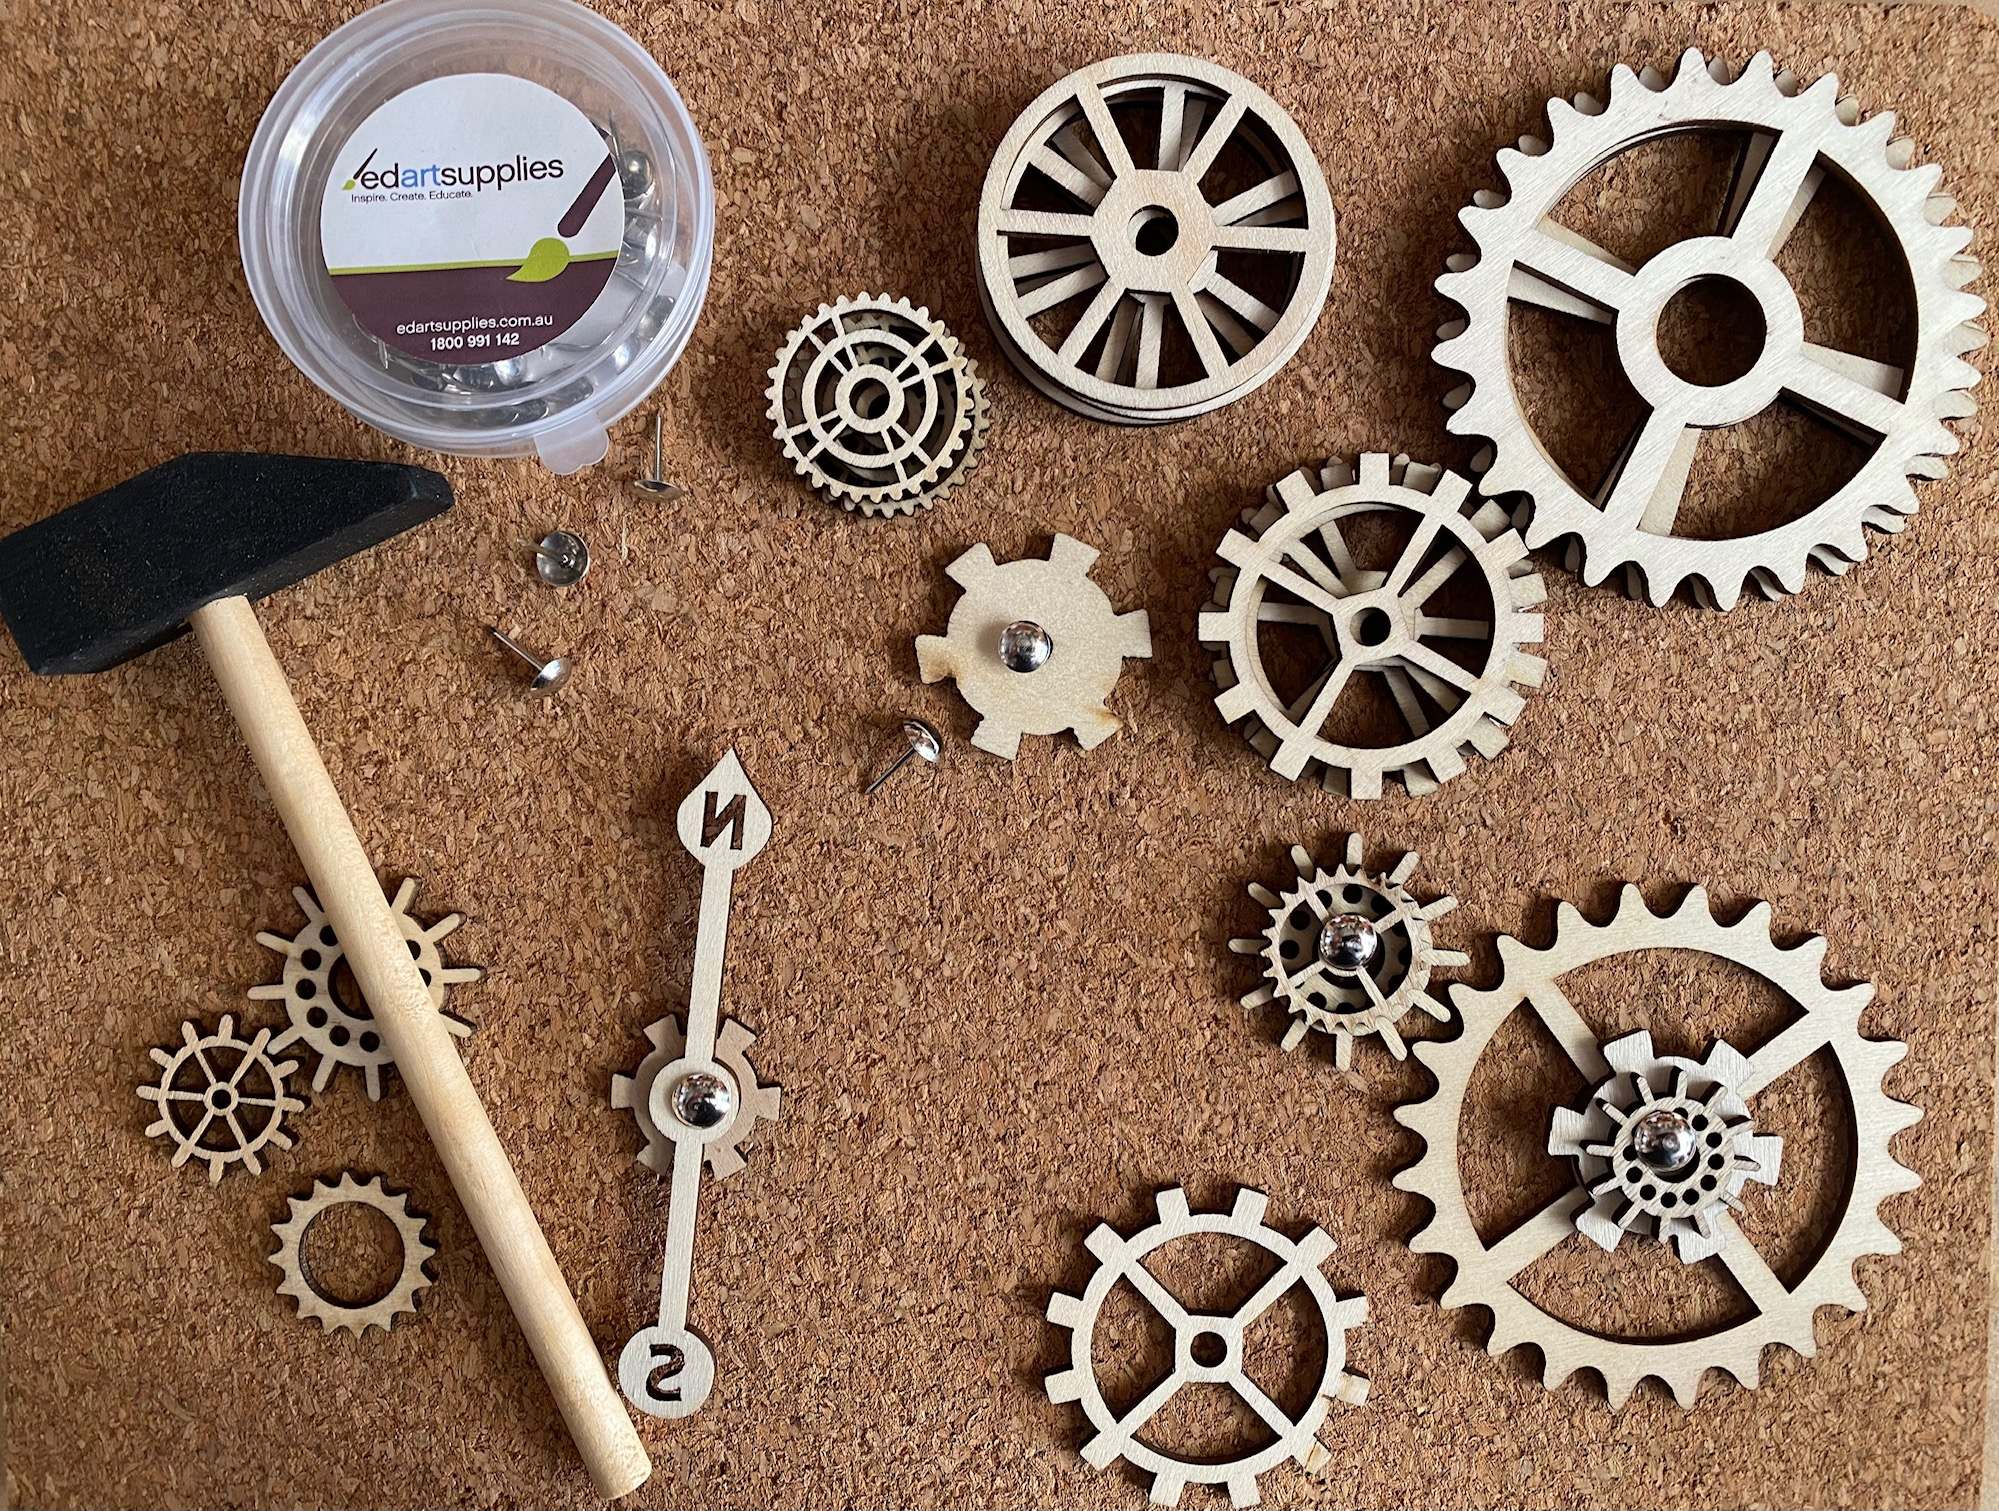  12pc. Set of Wooden Gears - Cool Industrial